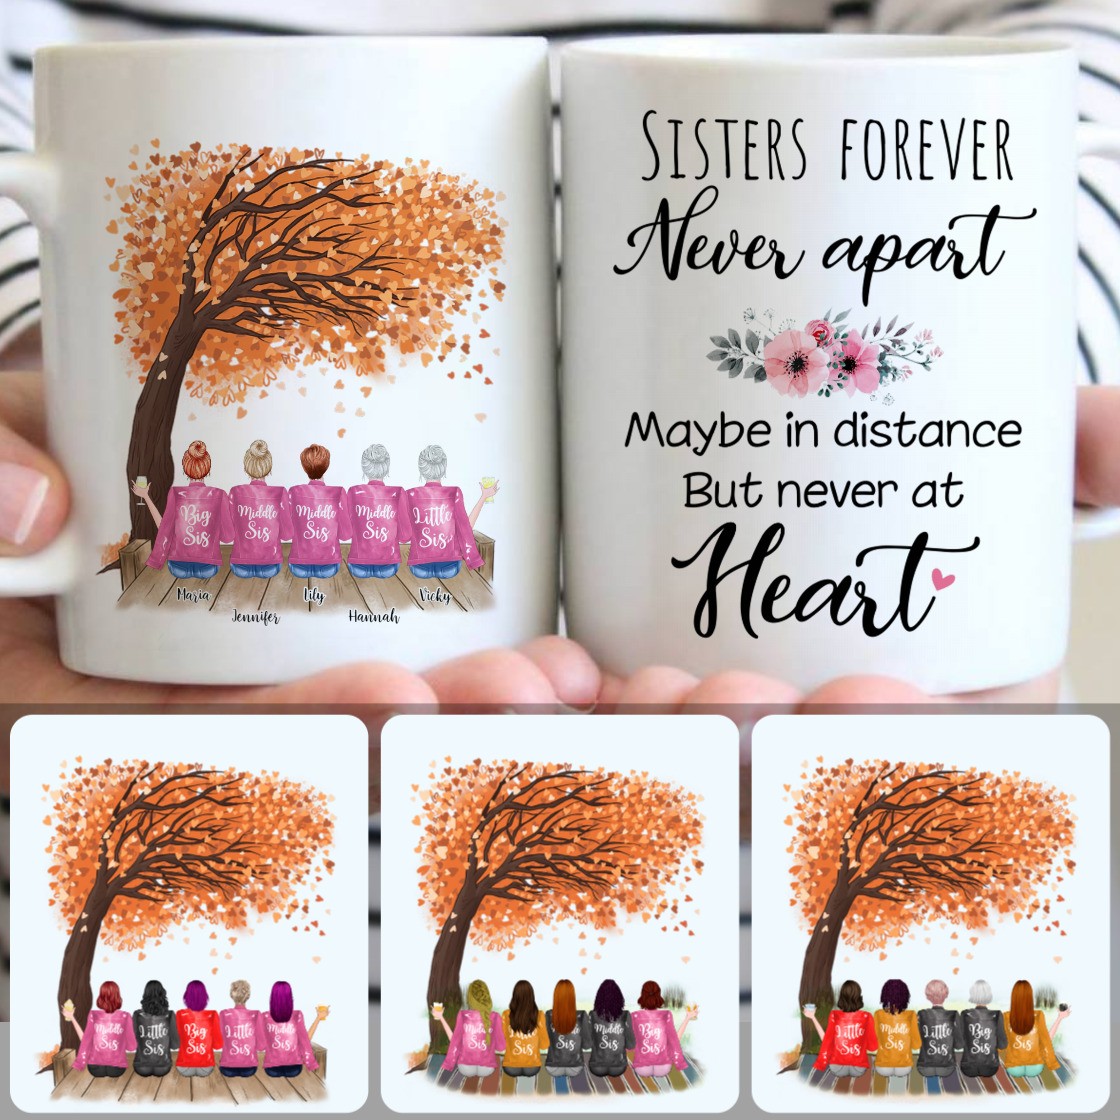 Personalized Mug, Meaningful Birthday Gifts, 5 Sisters Customized Coffee Mug With Names